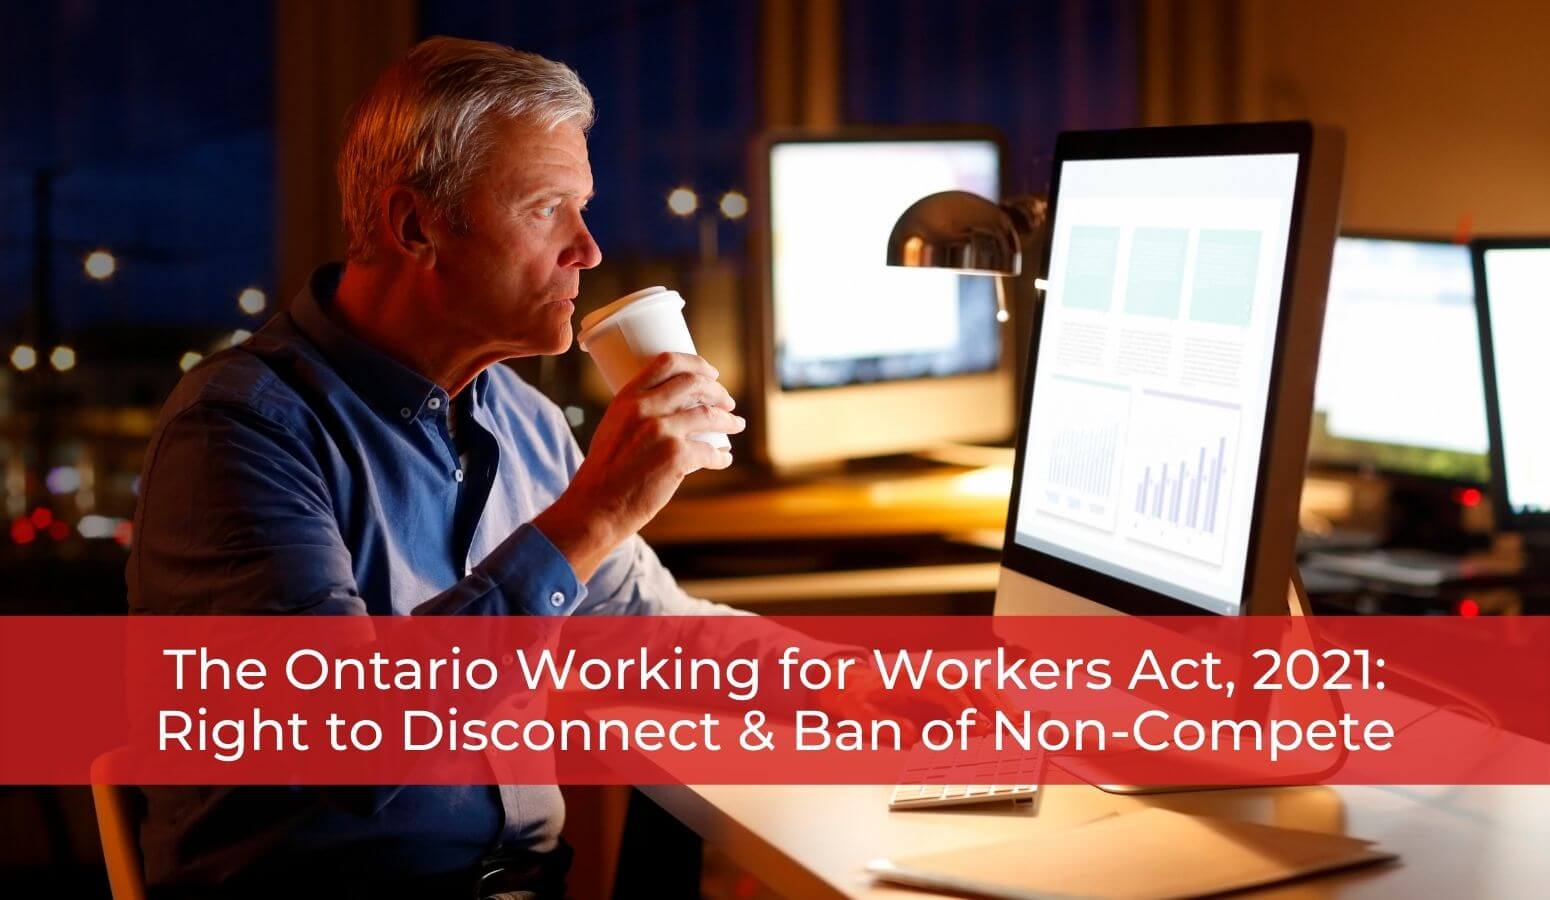 Featured image for “The Ontario Working for Workers Act, 2021: Right to Disconnect”